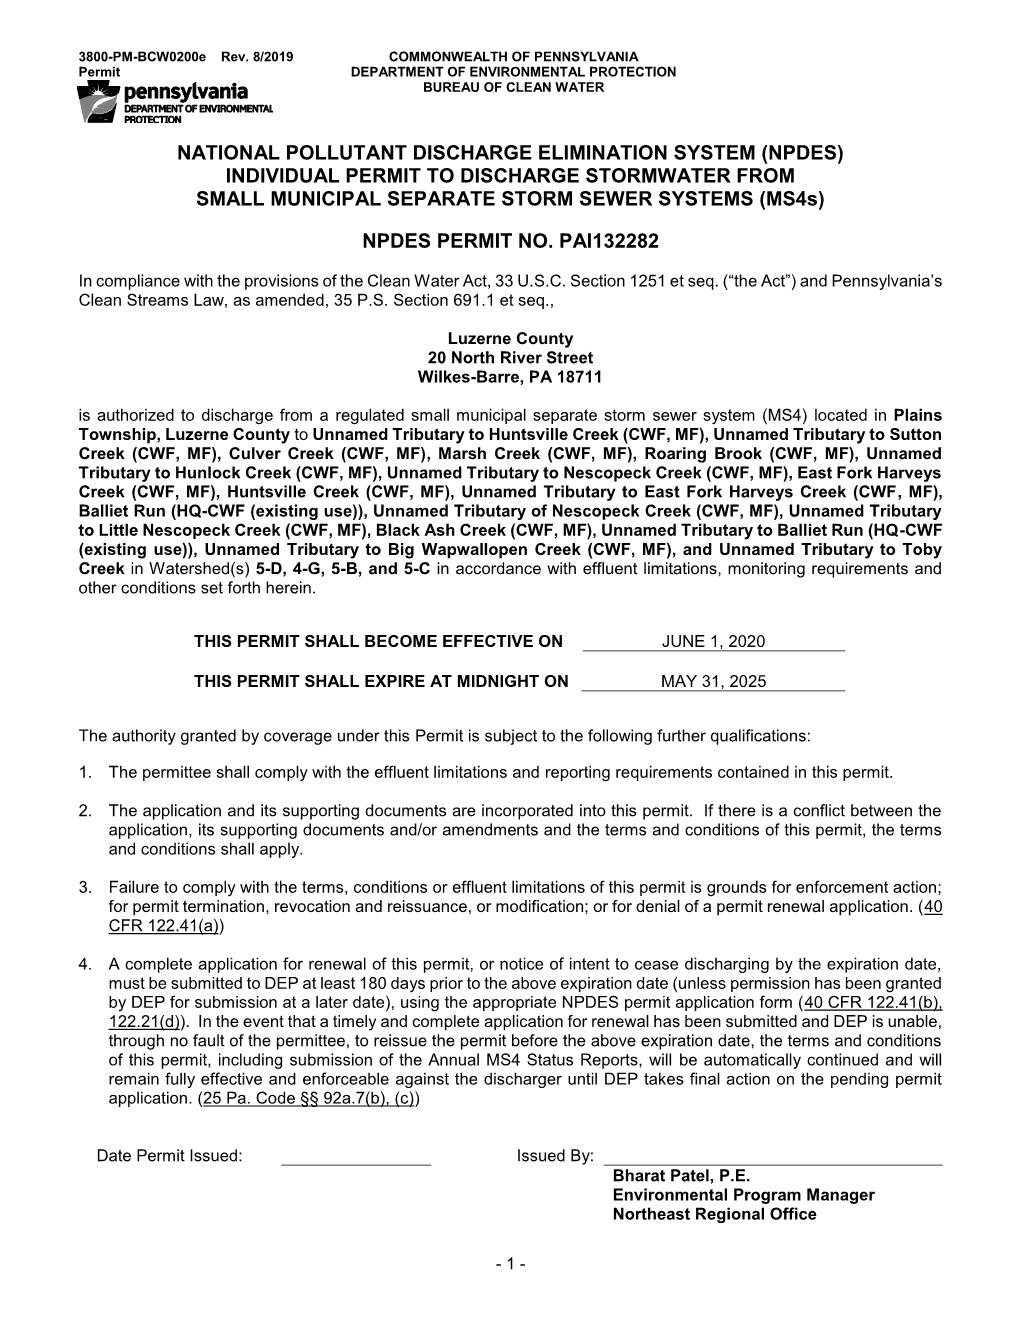 NPDES) INDIVIDUAL PERMIT to DISCHARGE STORMWATER from SMALL MUNICIPAL SEPARATE STORM SEWER SYSTEMS (Ms4s